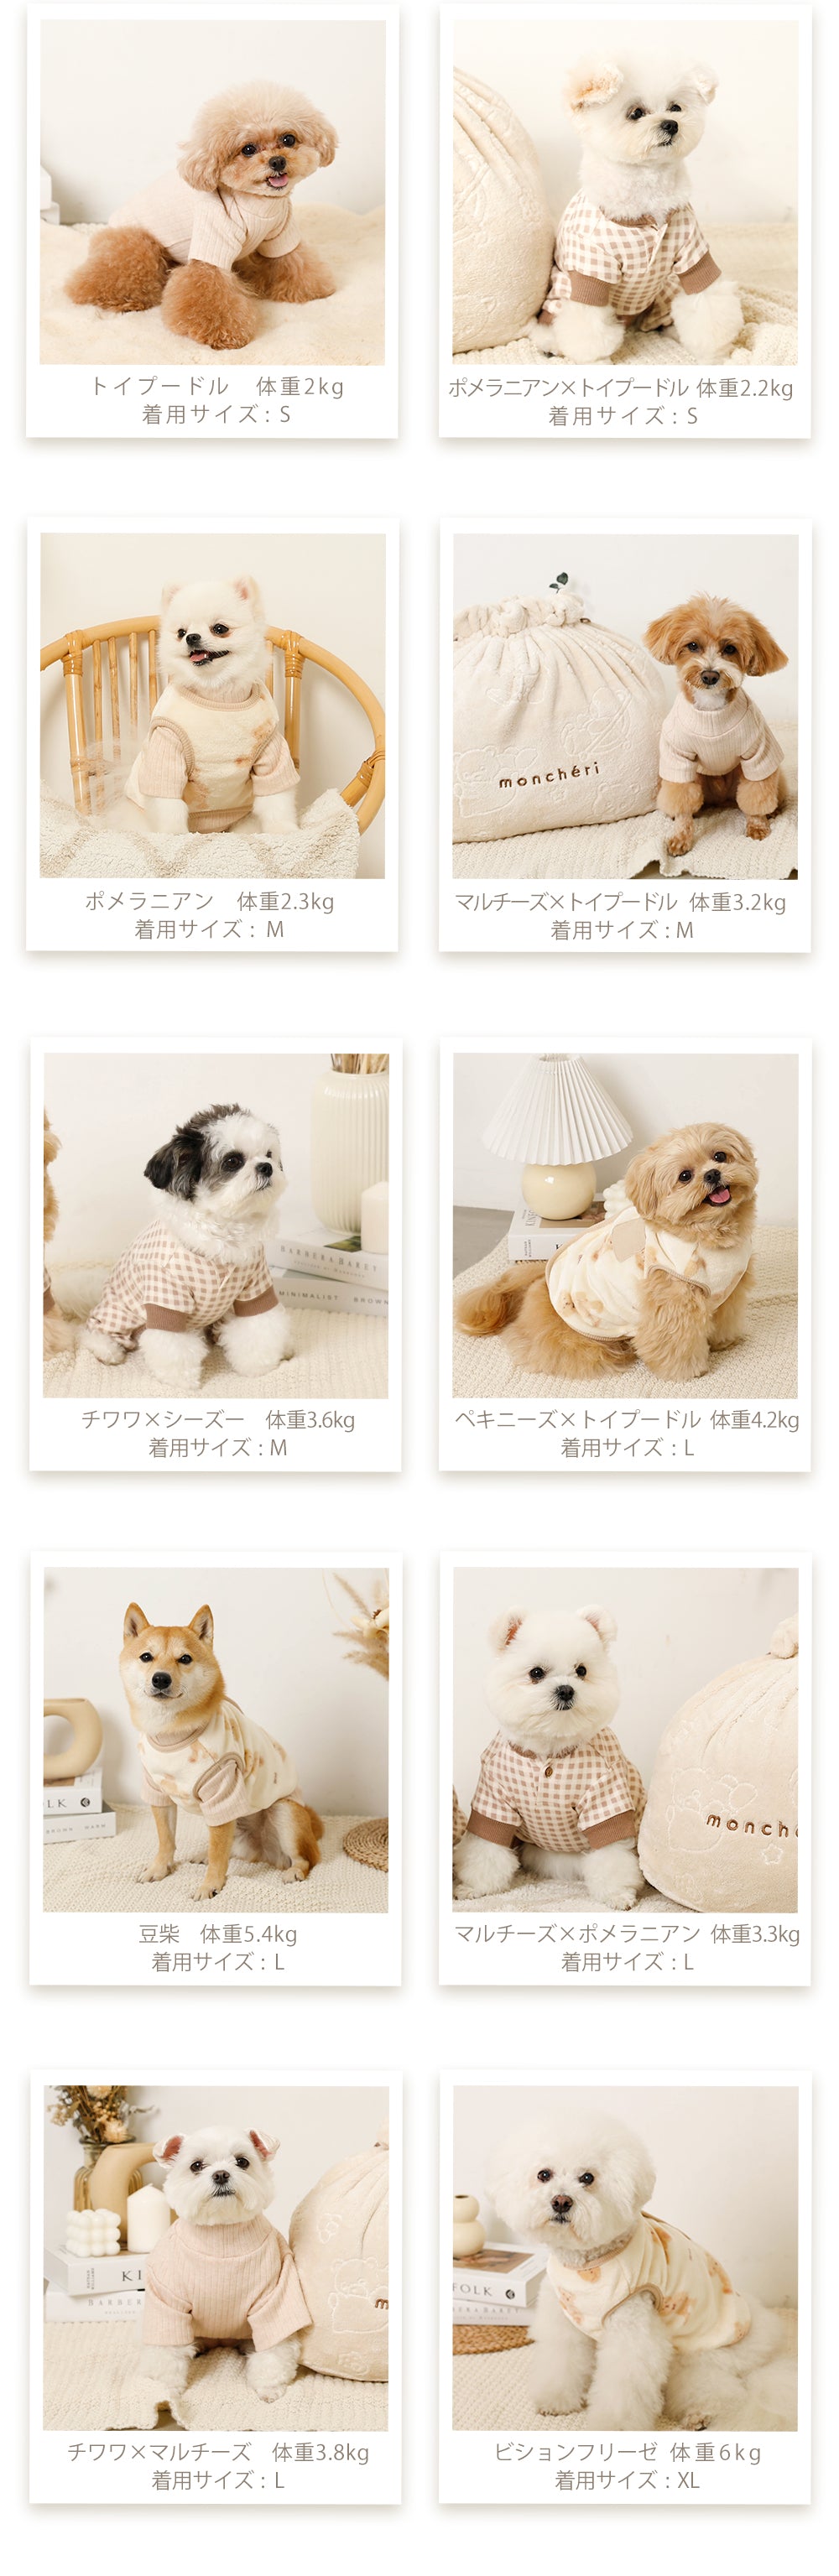 Monster/Dog Clothes/Lucky Bags/Wearing Model/Toy Poodle (2kg Wear Size S)/PomePoo (2.2kg Wear Size S)/Pomeranian (2.3kg Wear Size M)/Malpoo (3.2kg Wearing Size M)/Chiwa Zoo (3.6kg (3.6kg) Wearing size M)/Peco Poo (4.2kg Wearing size L)/Mameshiba (5.4kg Wear size L)/Marpome (3.3kg Wear size L) Chiwa Maru (3.8kg Wear size L)/Betit Frize (6kg Wear size L)/ Mameshiba (5.4kg worn size XL)/